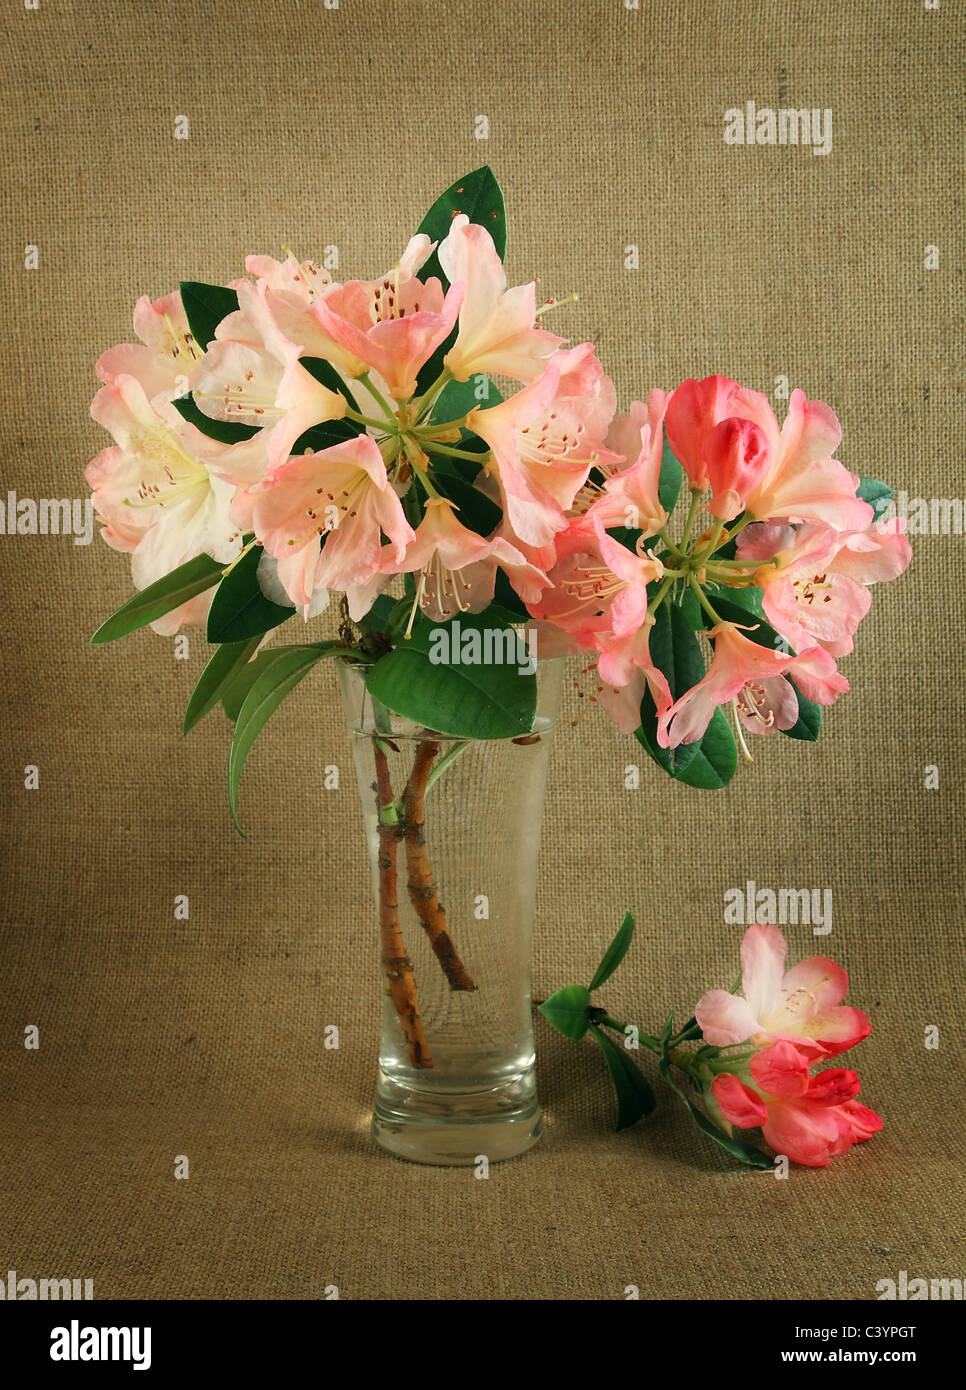 Romantic still life with pink rhododendrons in vase Stock Photo